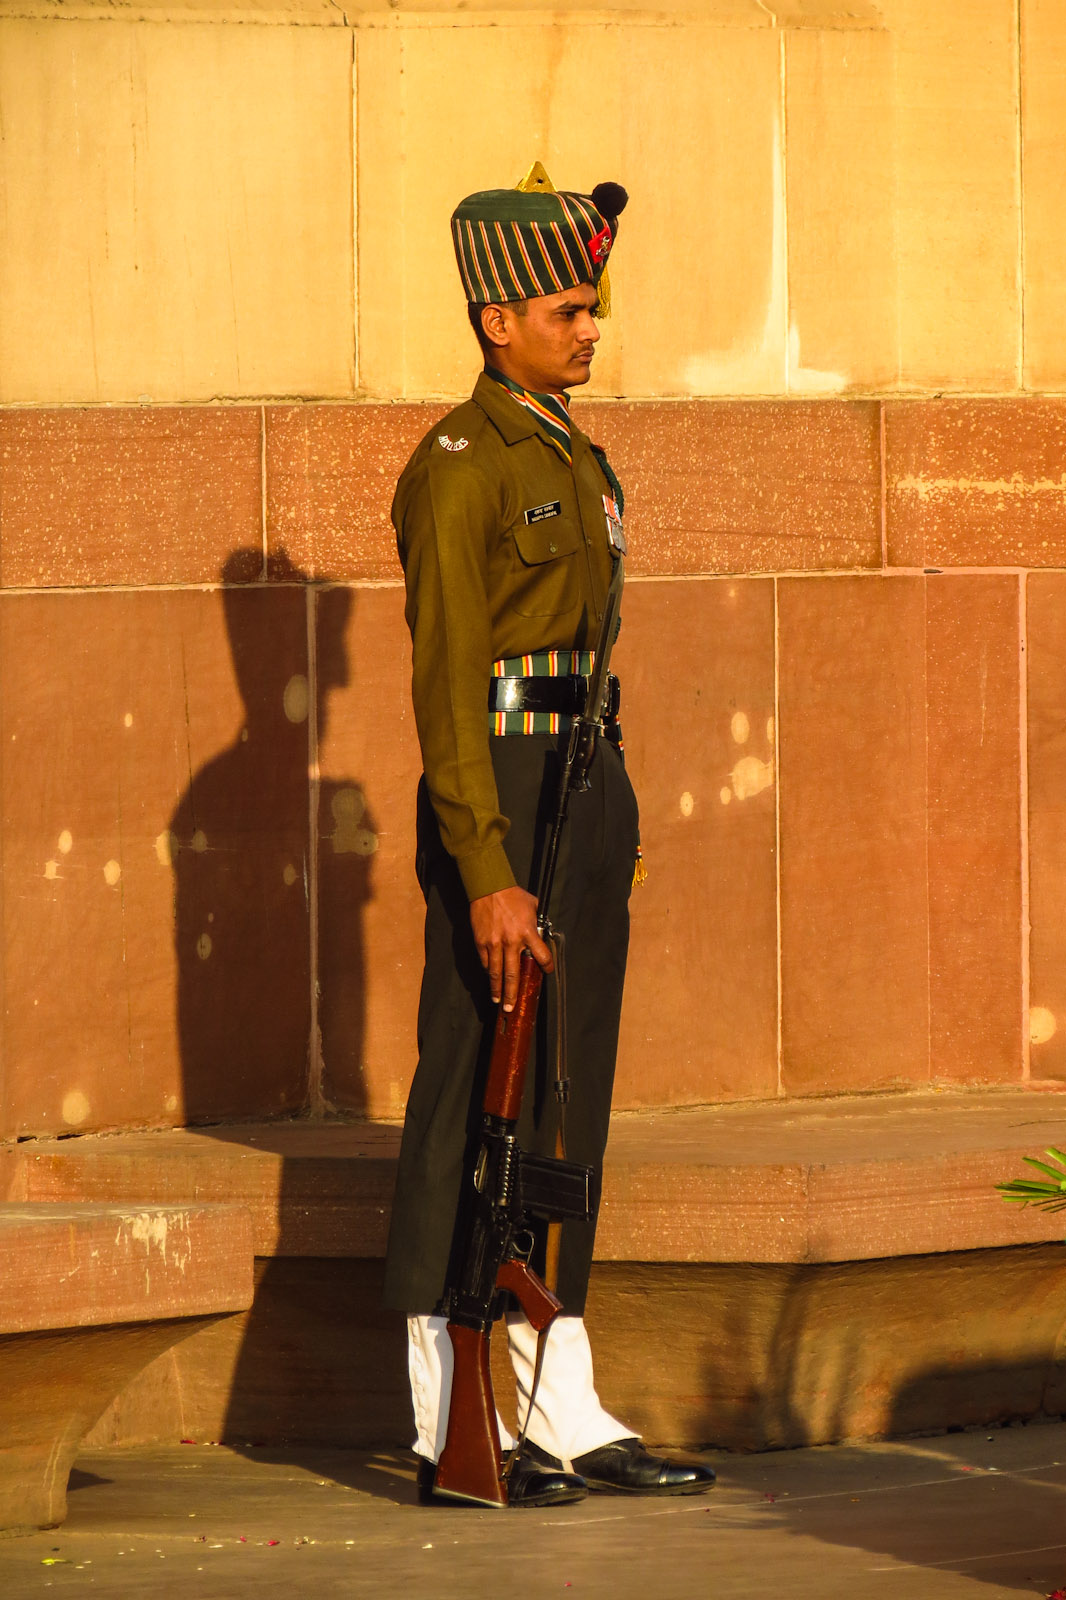 india-gate-soldier